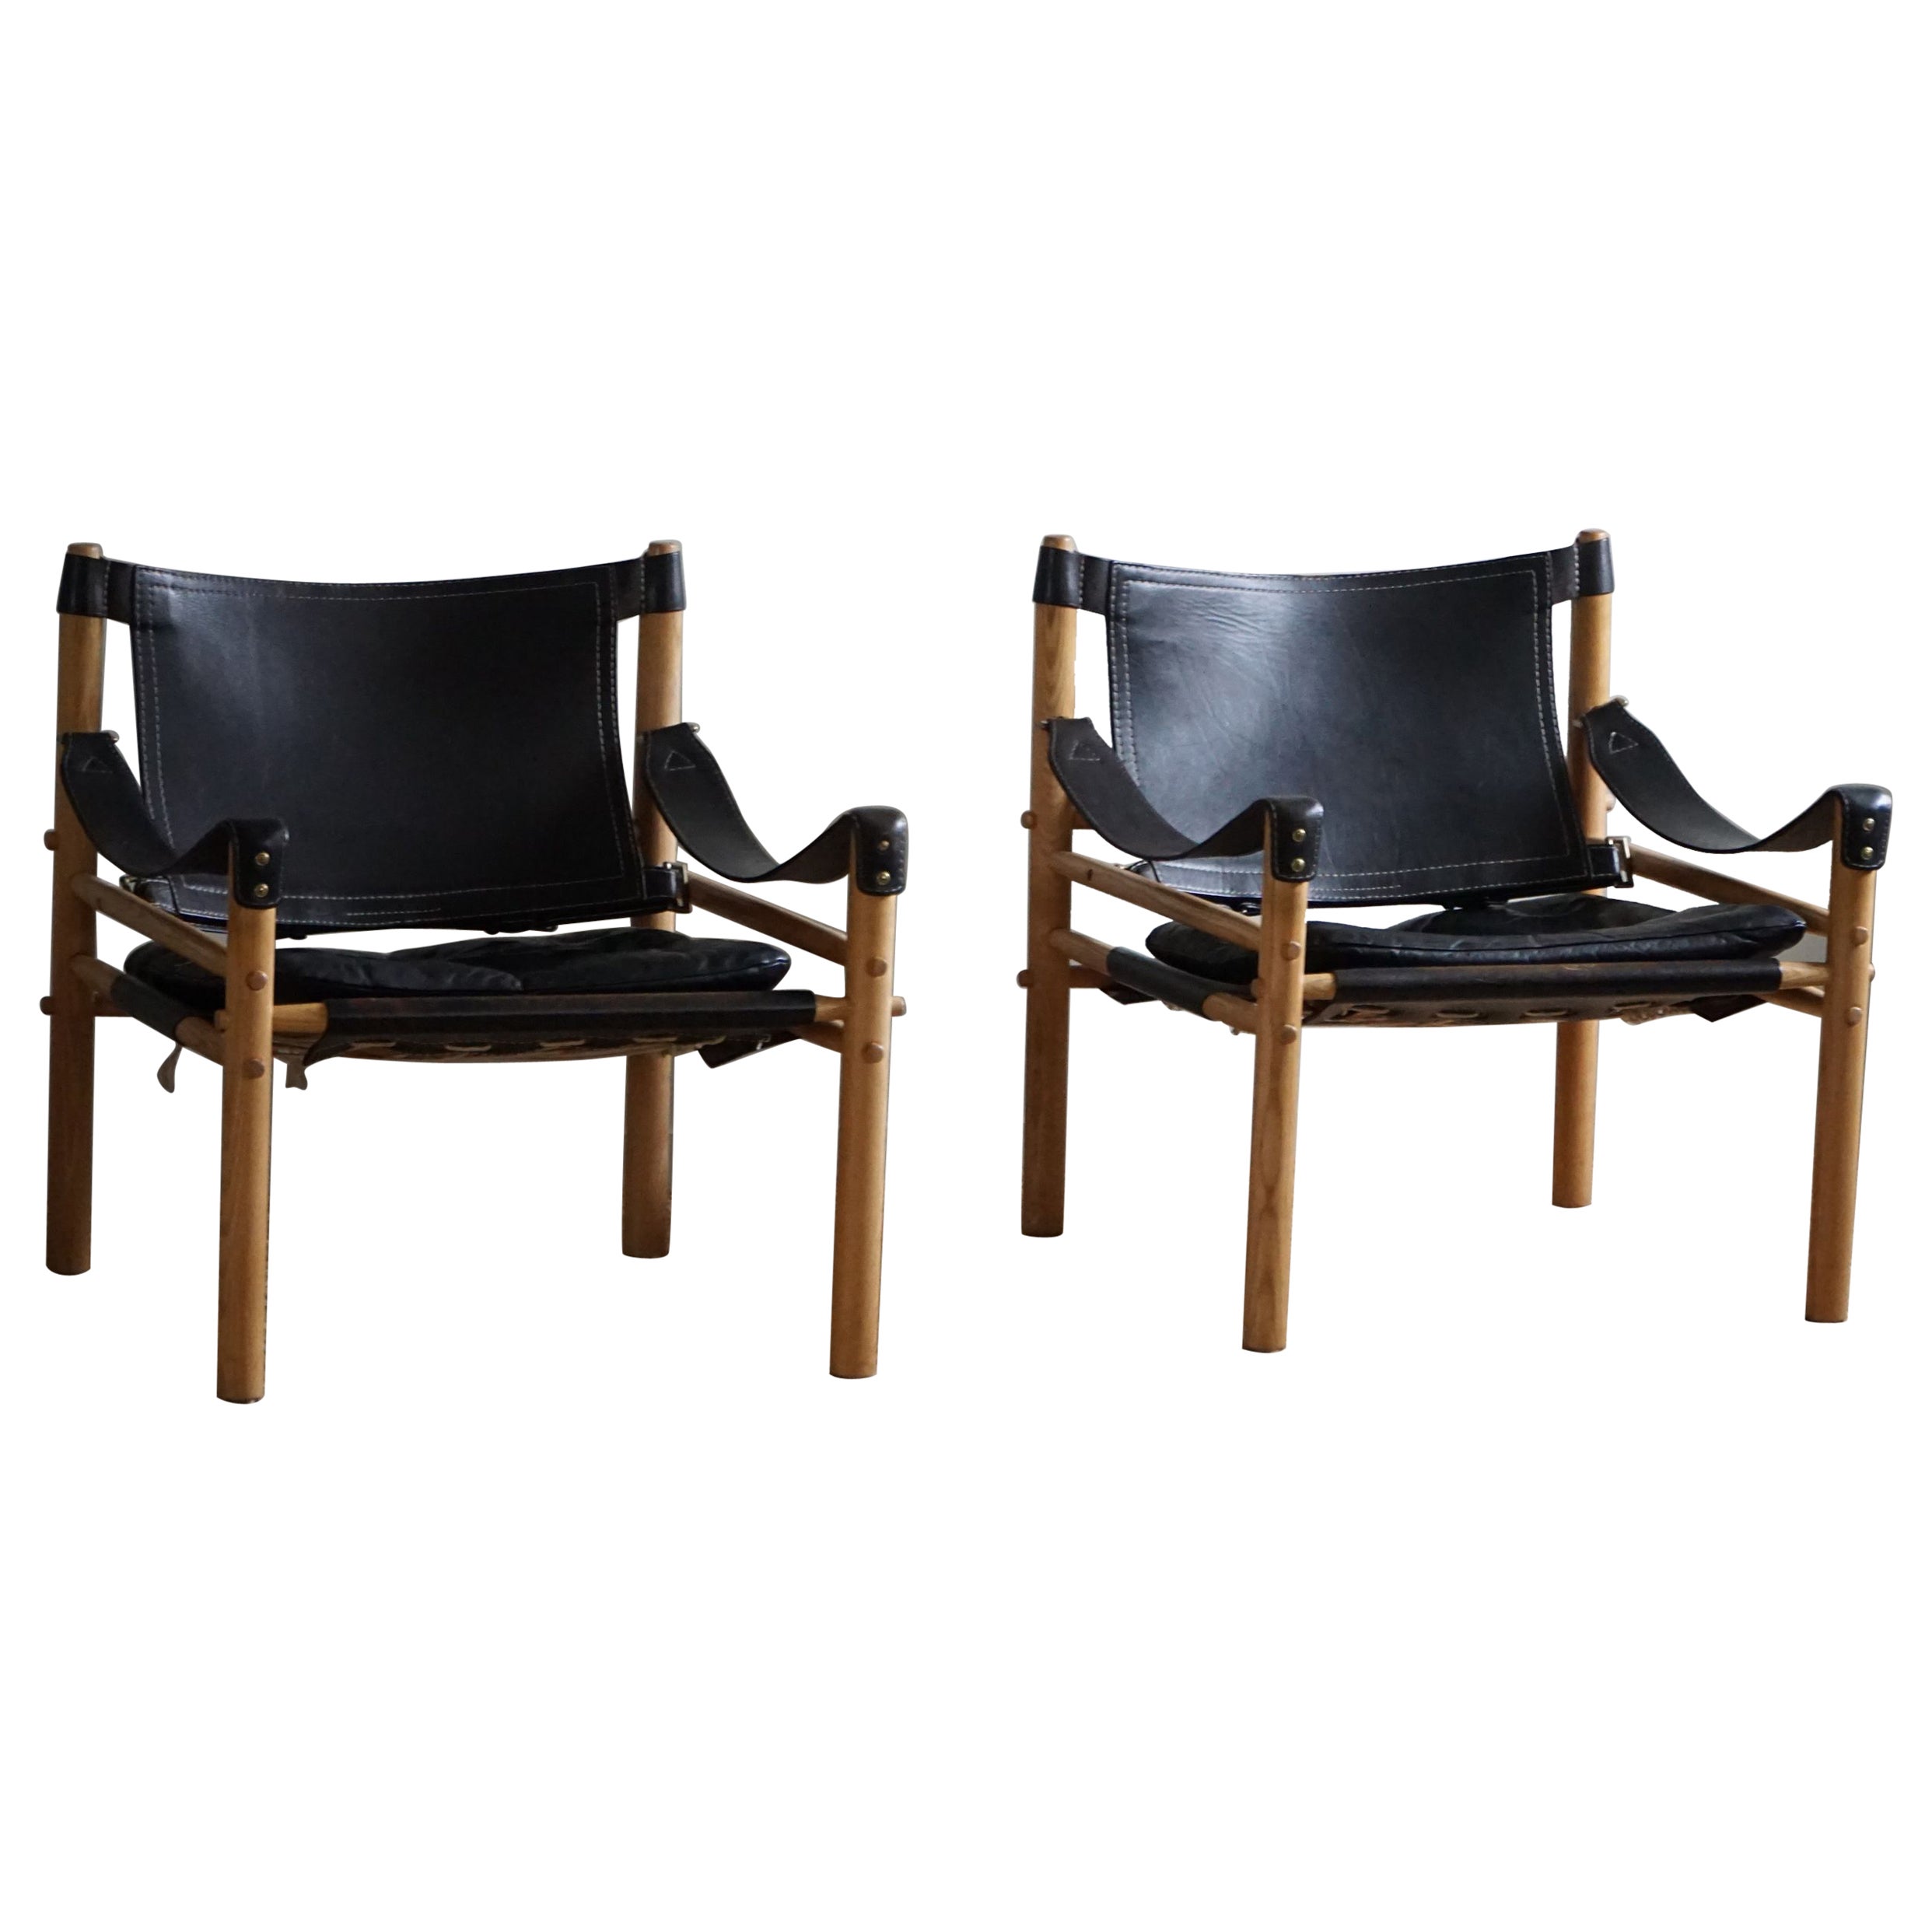 Pair of Sirocco Lounge Chairs in Ash & Leather, Arne Norell, Ab Aneby, 1960s